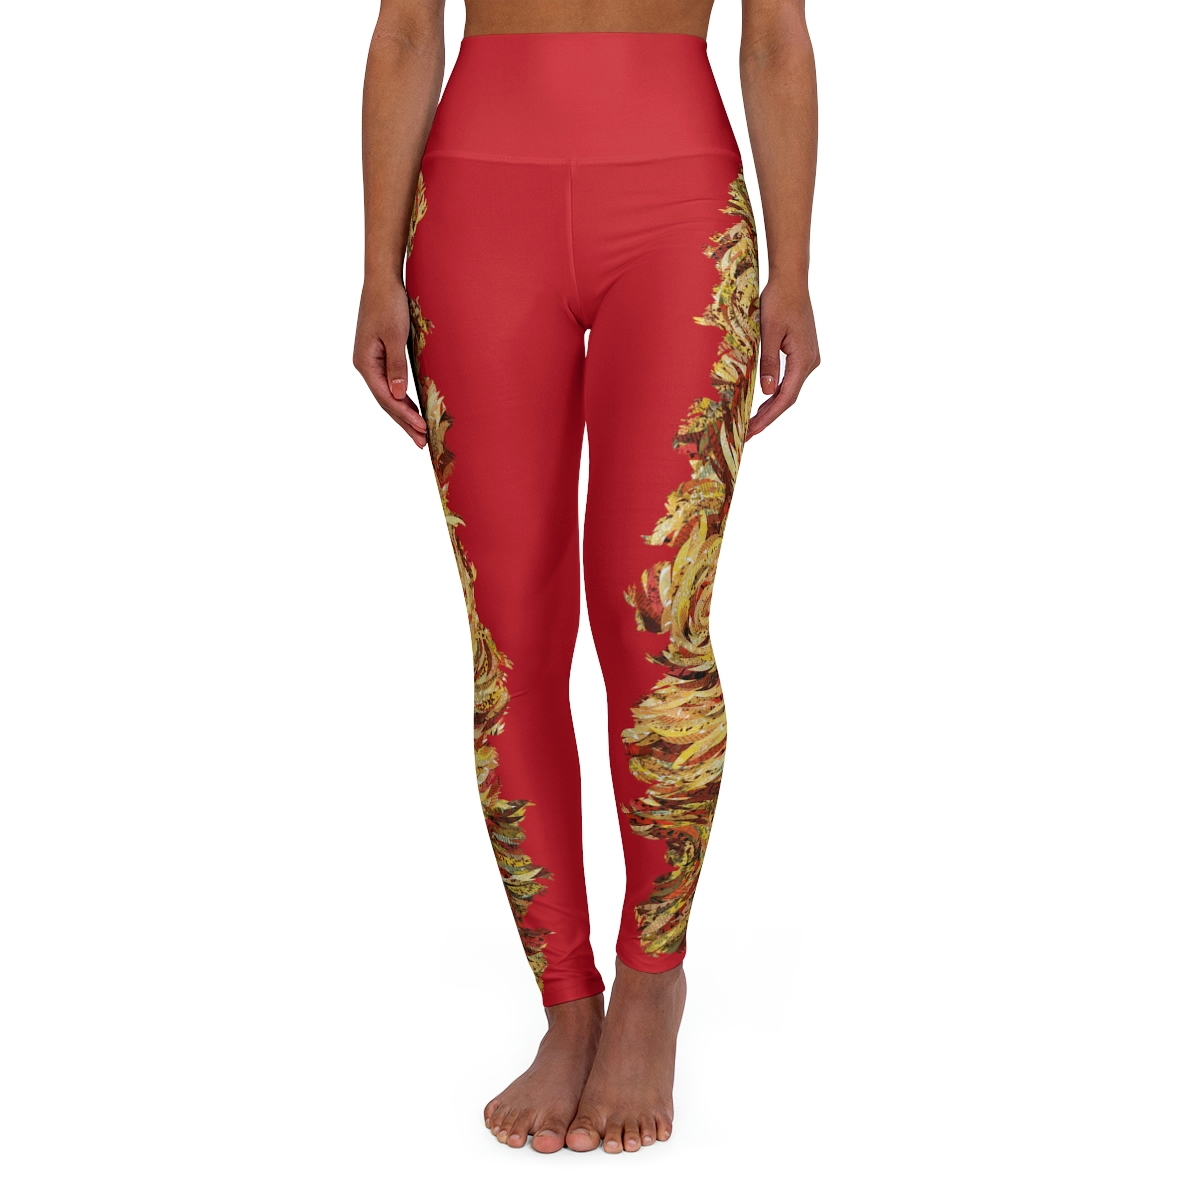 High Waisted Yoga Leggings-Red/Gold Feather Print-Turbulence Detail